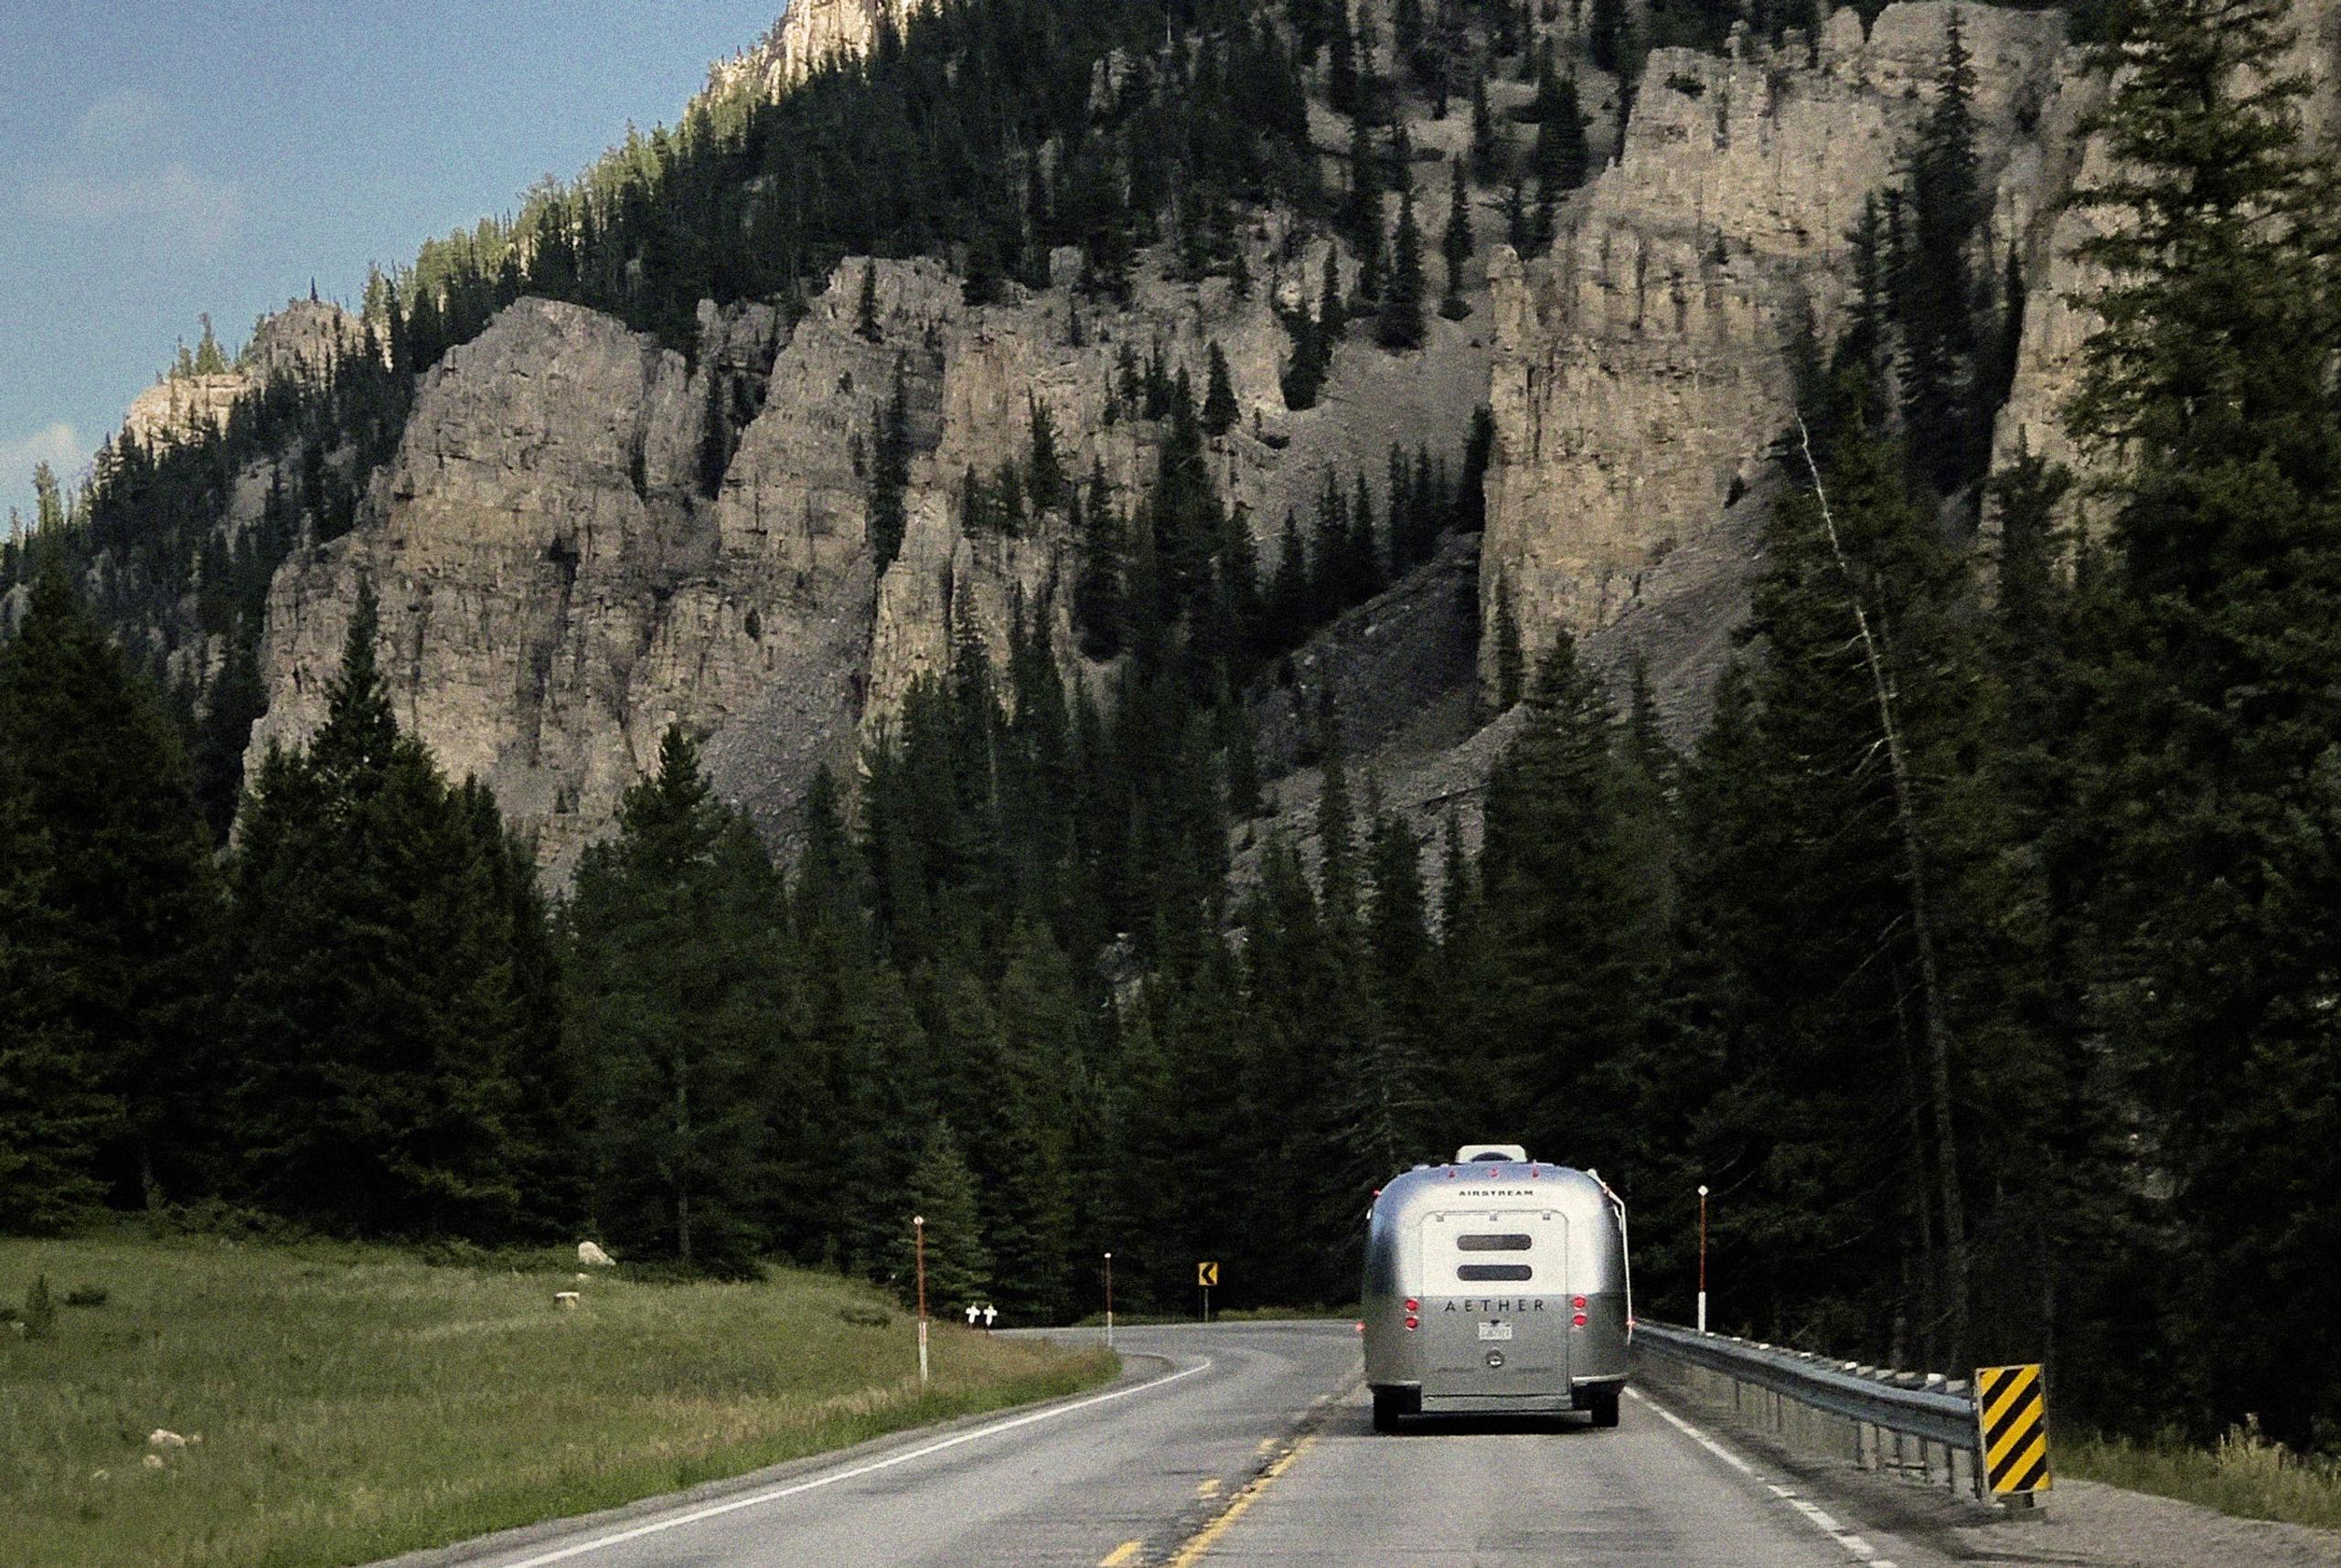 Aether Apparel airstream on the road